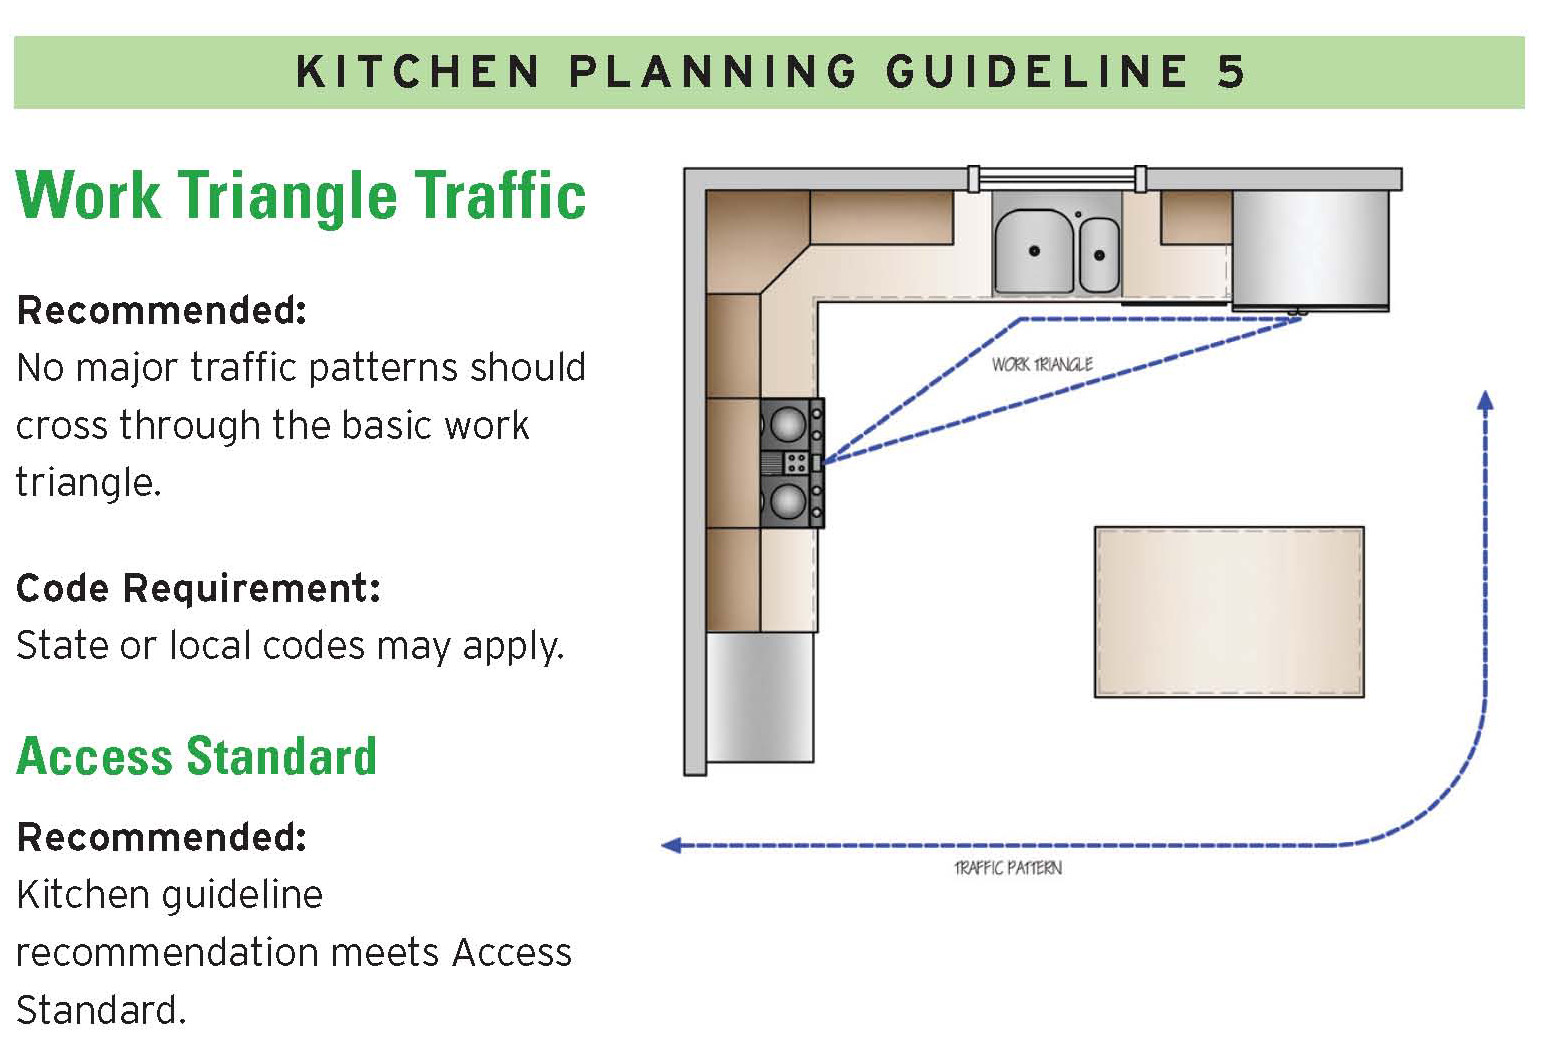 kitchen-guidelines-2012_page_05_2